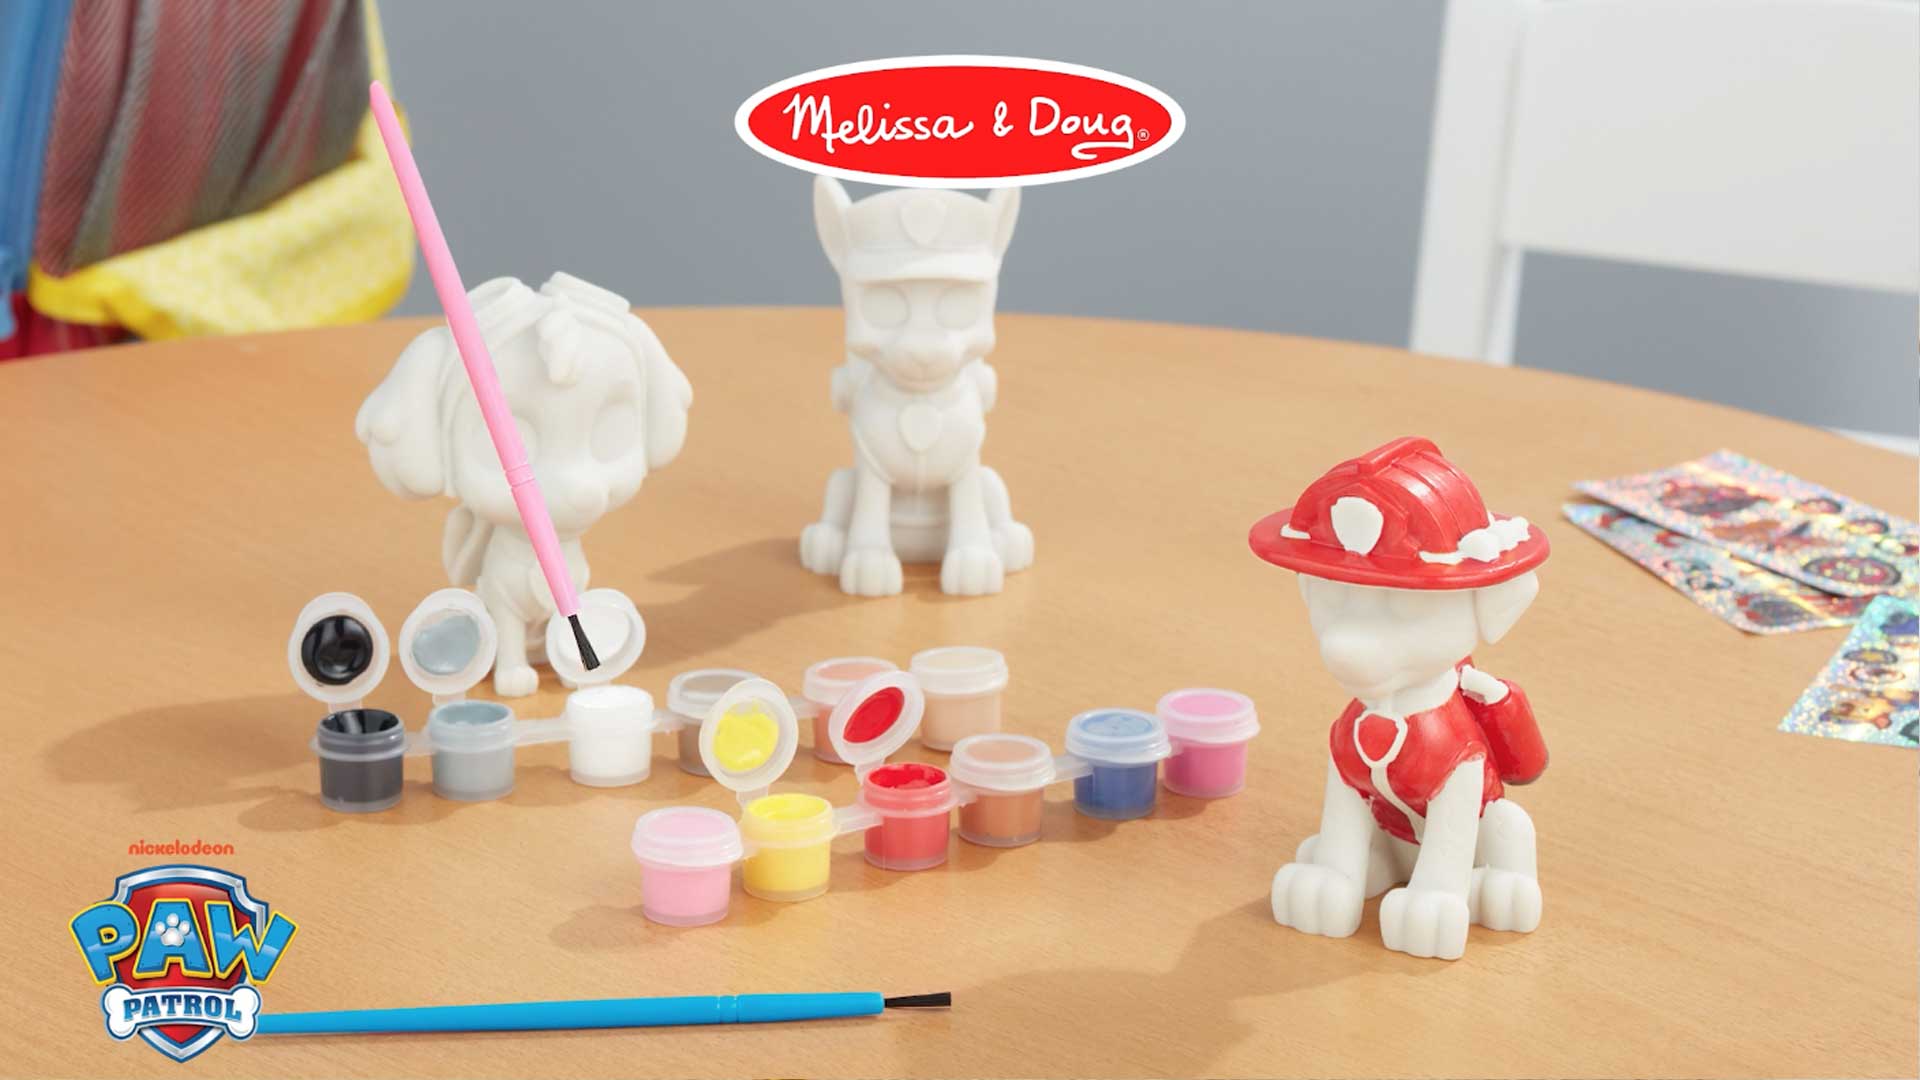 Commercial studio product photography and video production in Westchester, New York for Melissa & Doug Paw Patrol paintable figures